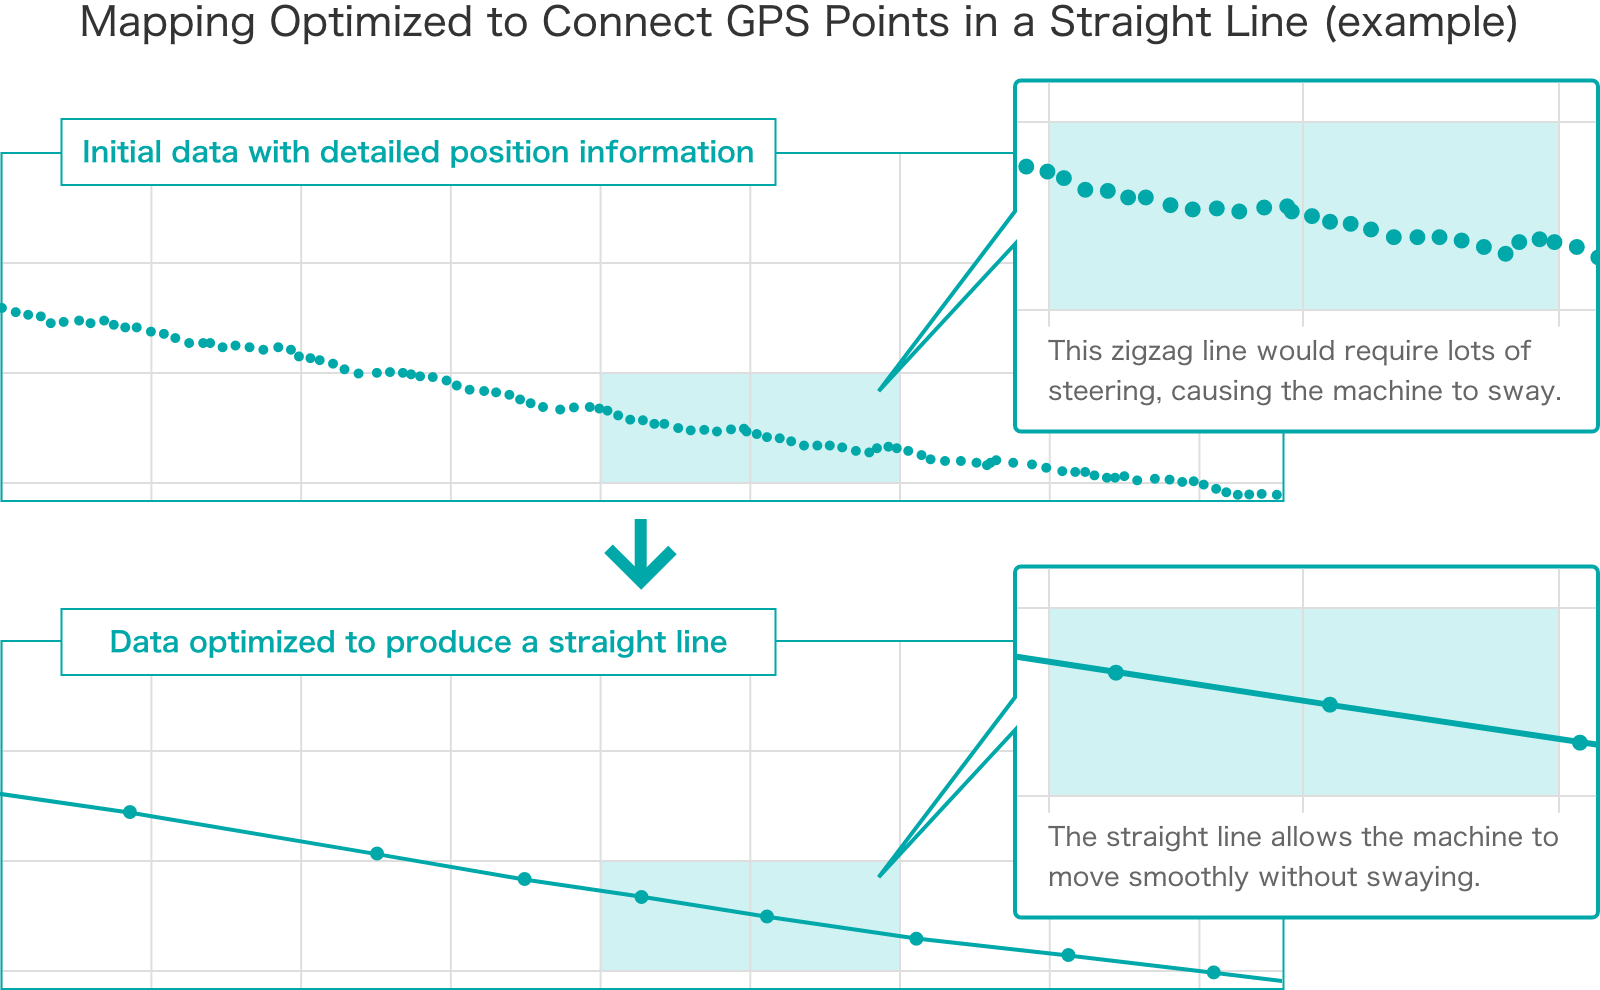 Mapping Optimized to Connect GPS Points in a Straight Line (example)